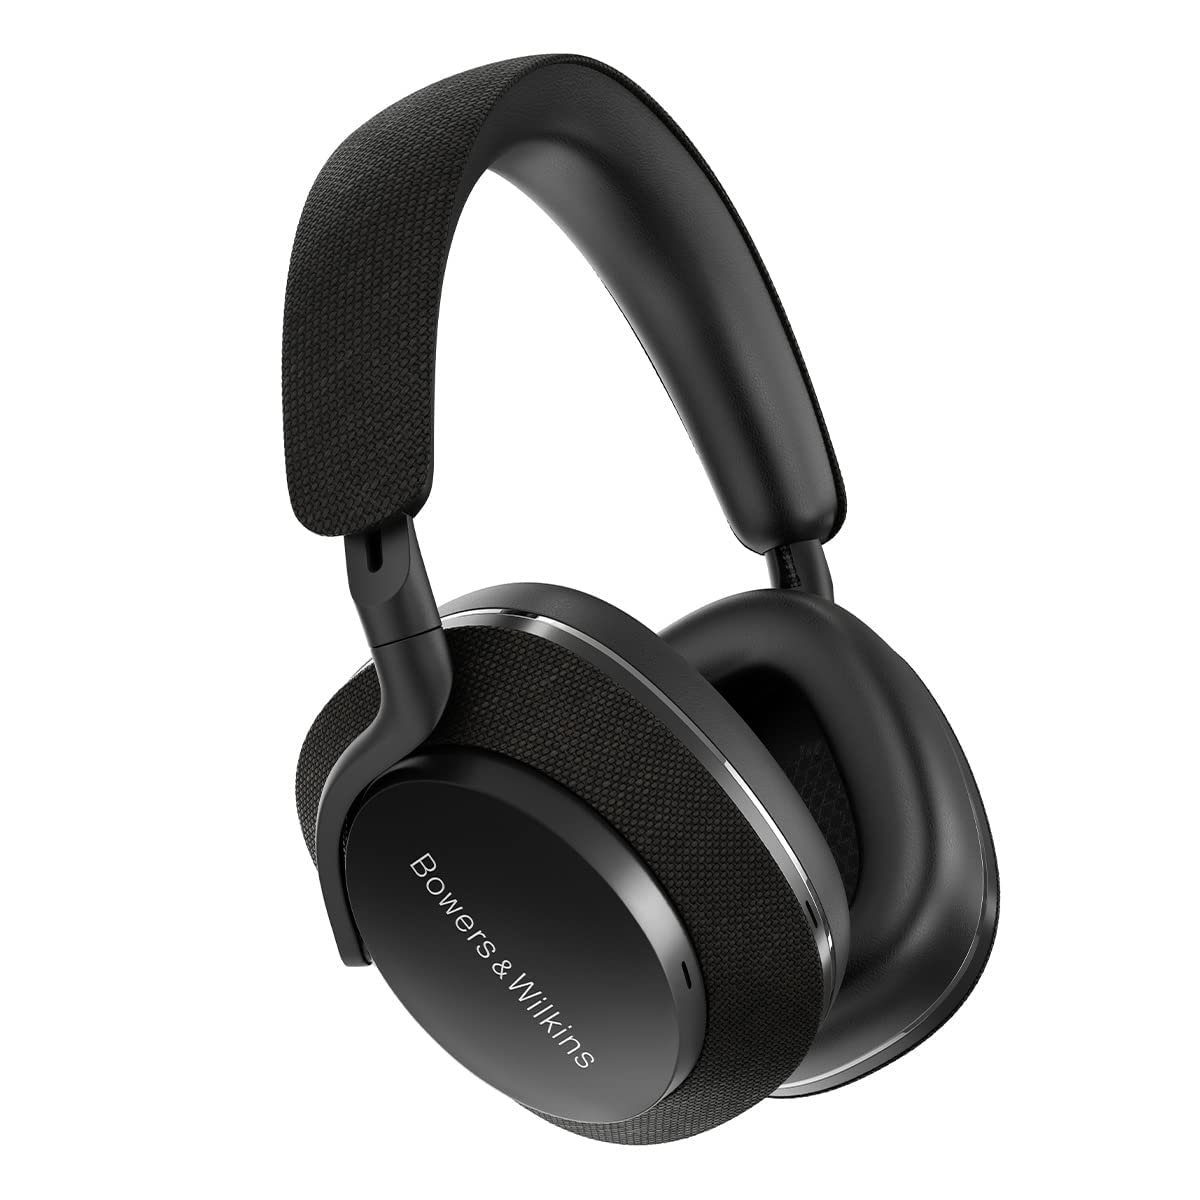  Bowers & Wilkins Px7 S2 Over-Ear Headphones (2022 Model) - All-New Advanced Noise Cancellation, Works with B&W Android/iOS Music App, Slim & Lightweight, 7-Hour Playback on 15-Min Quick Charge,...